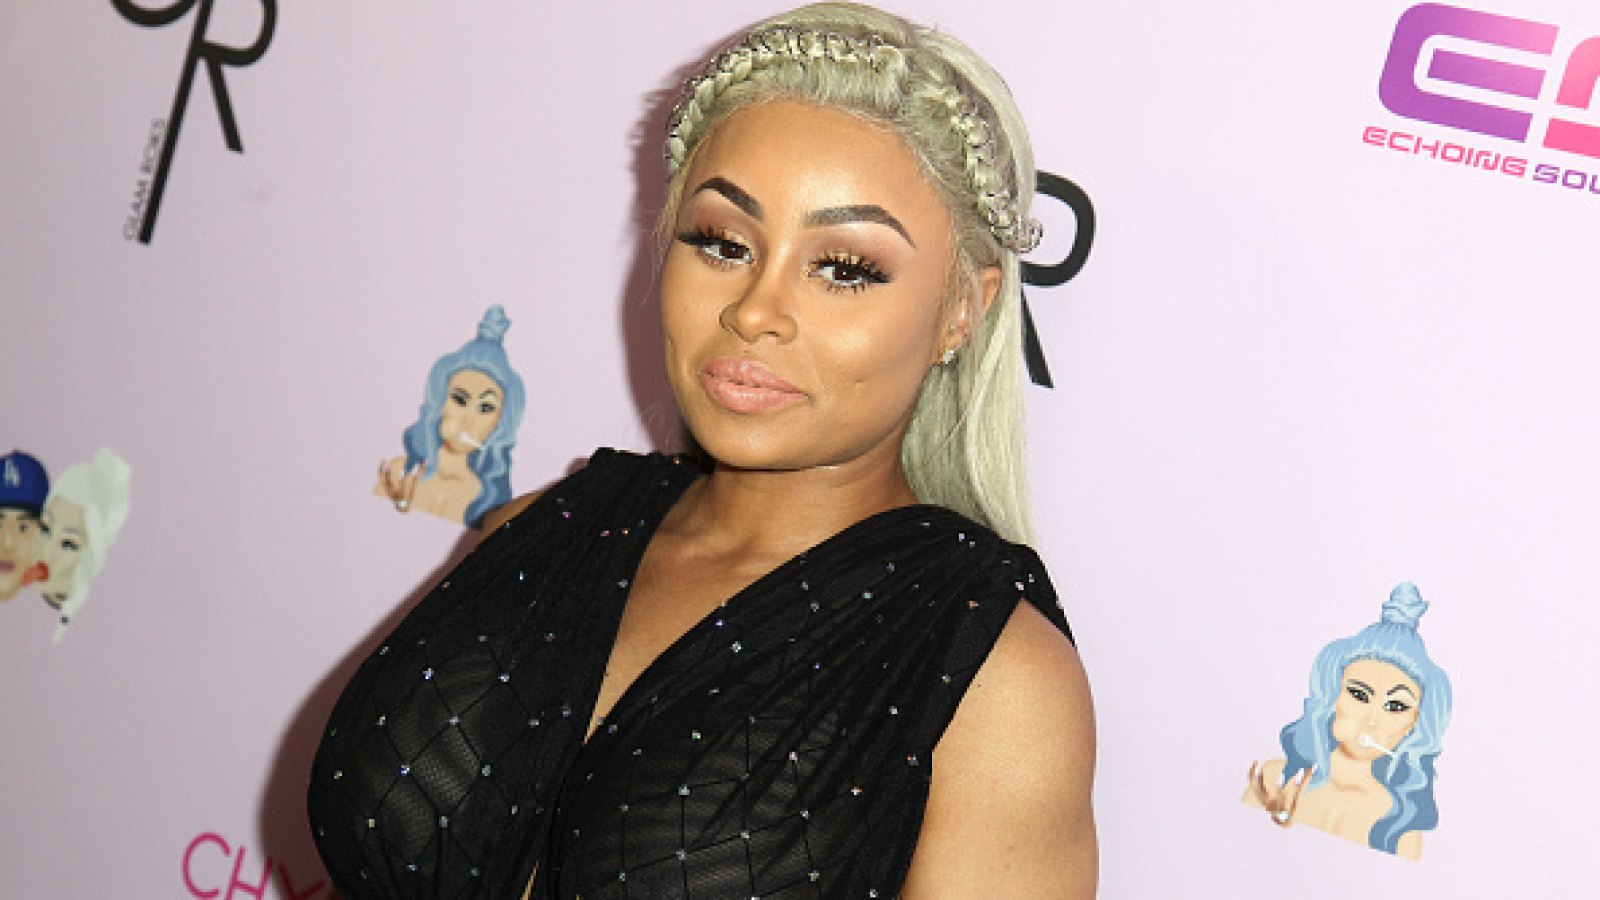 Blac Chyna Calls Herself Angela as She Shows Off Gingerbread House With Rob Kardashian